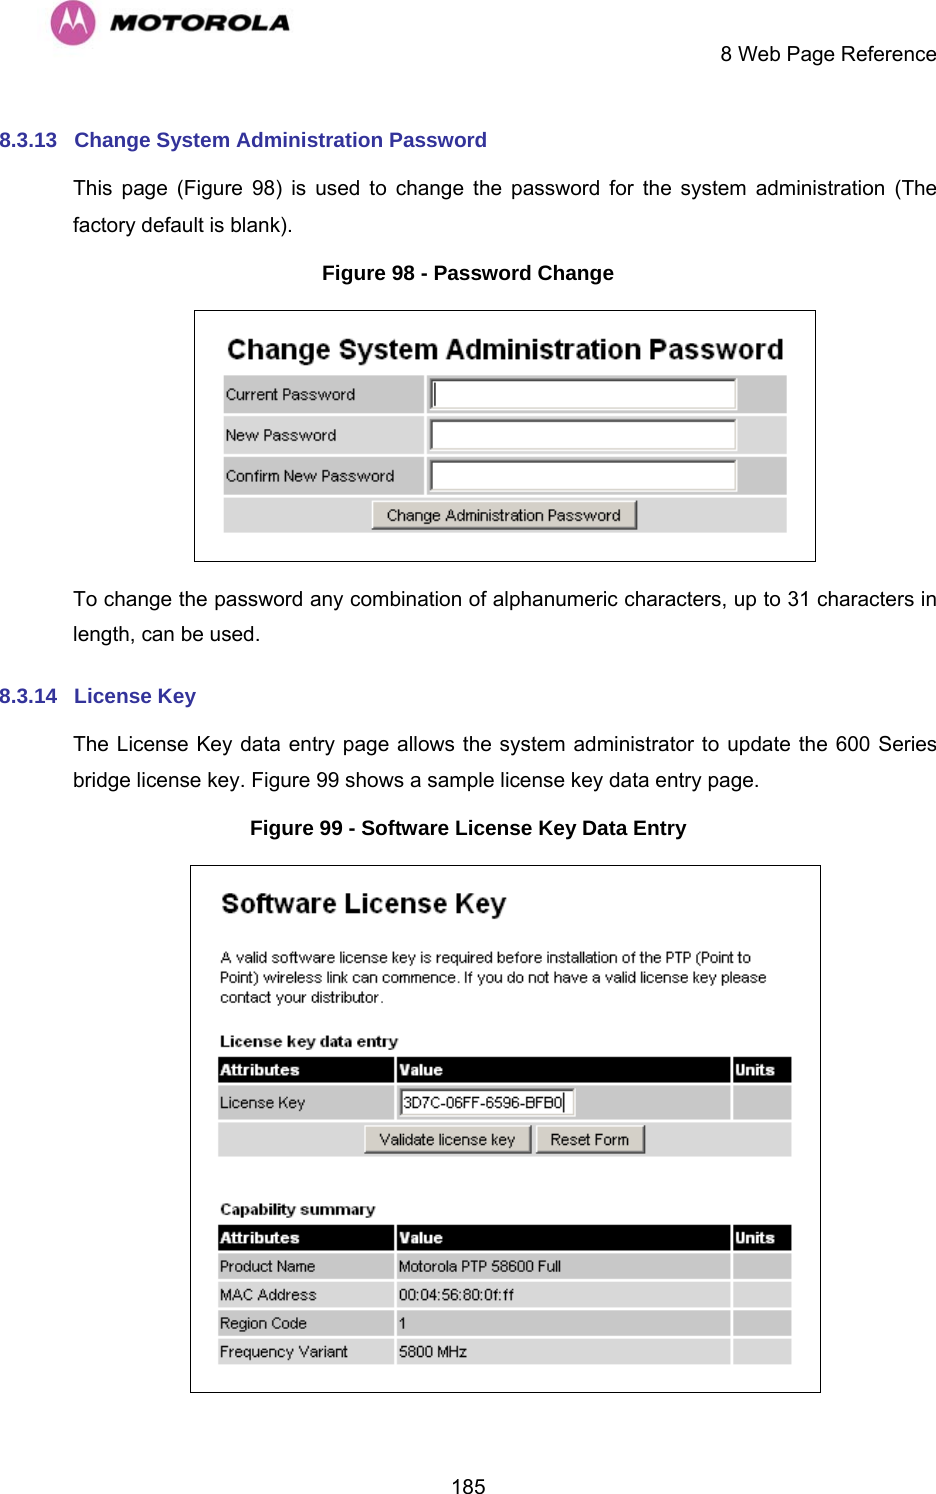     8 Web Page Reference  1858.3.13  Change System Administration Password  This page (Figure 98) is used to change the password for the system administration (The factory default is blank). Figure 98 - Password Change  To change the password any combination of alphanumeric characters, up to 31 characters in length, can be used. 8.3.14  License Key The License Key data entry page allows the system administrator to update the 600 Series bridge license key. Figure 99 shows a sample license key data entry page. Figure 99 - Software License Key Data Entry  